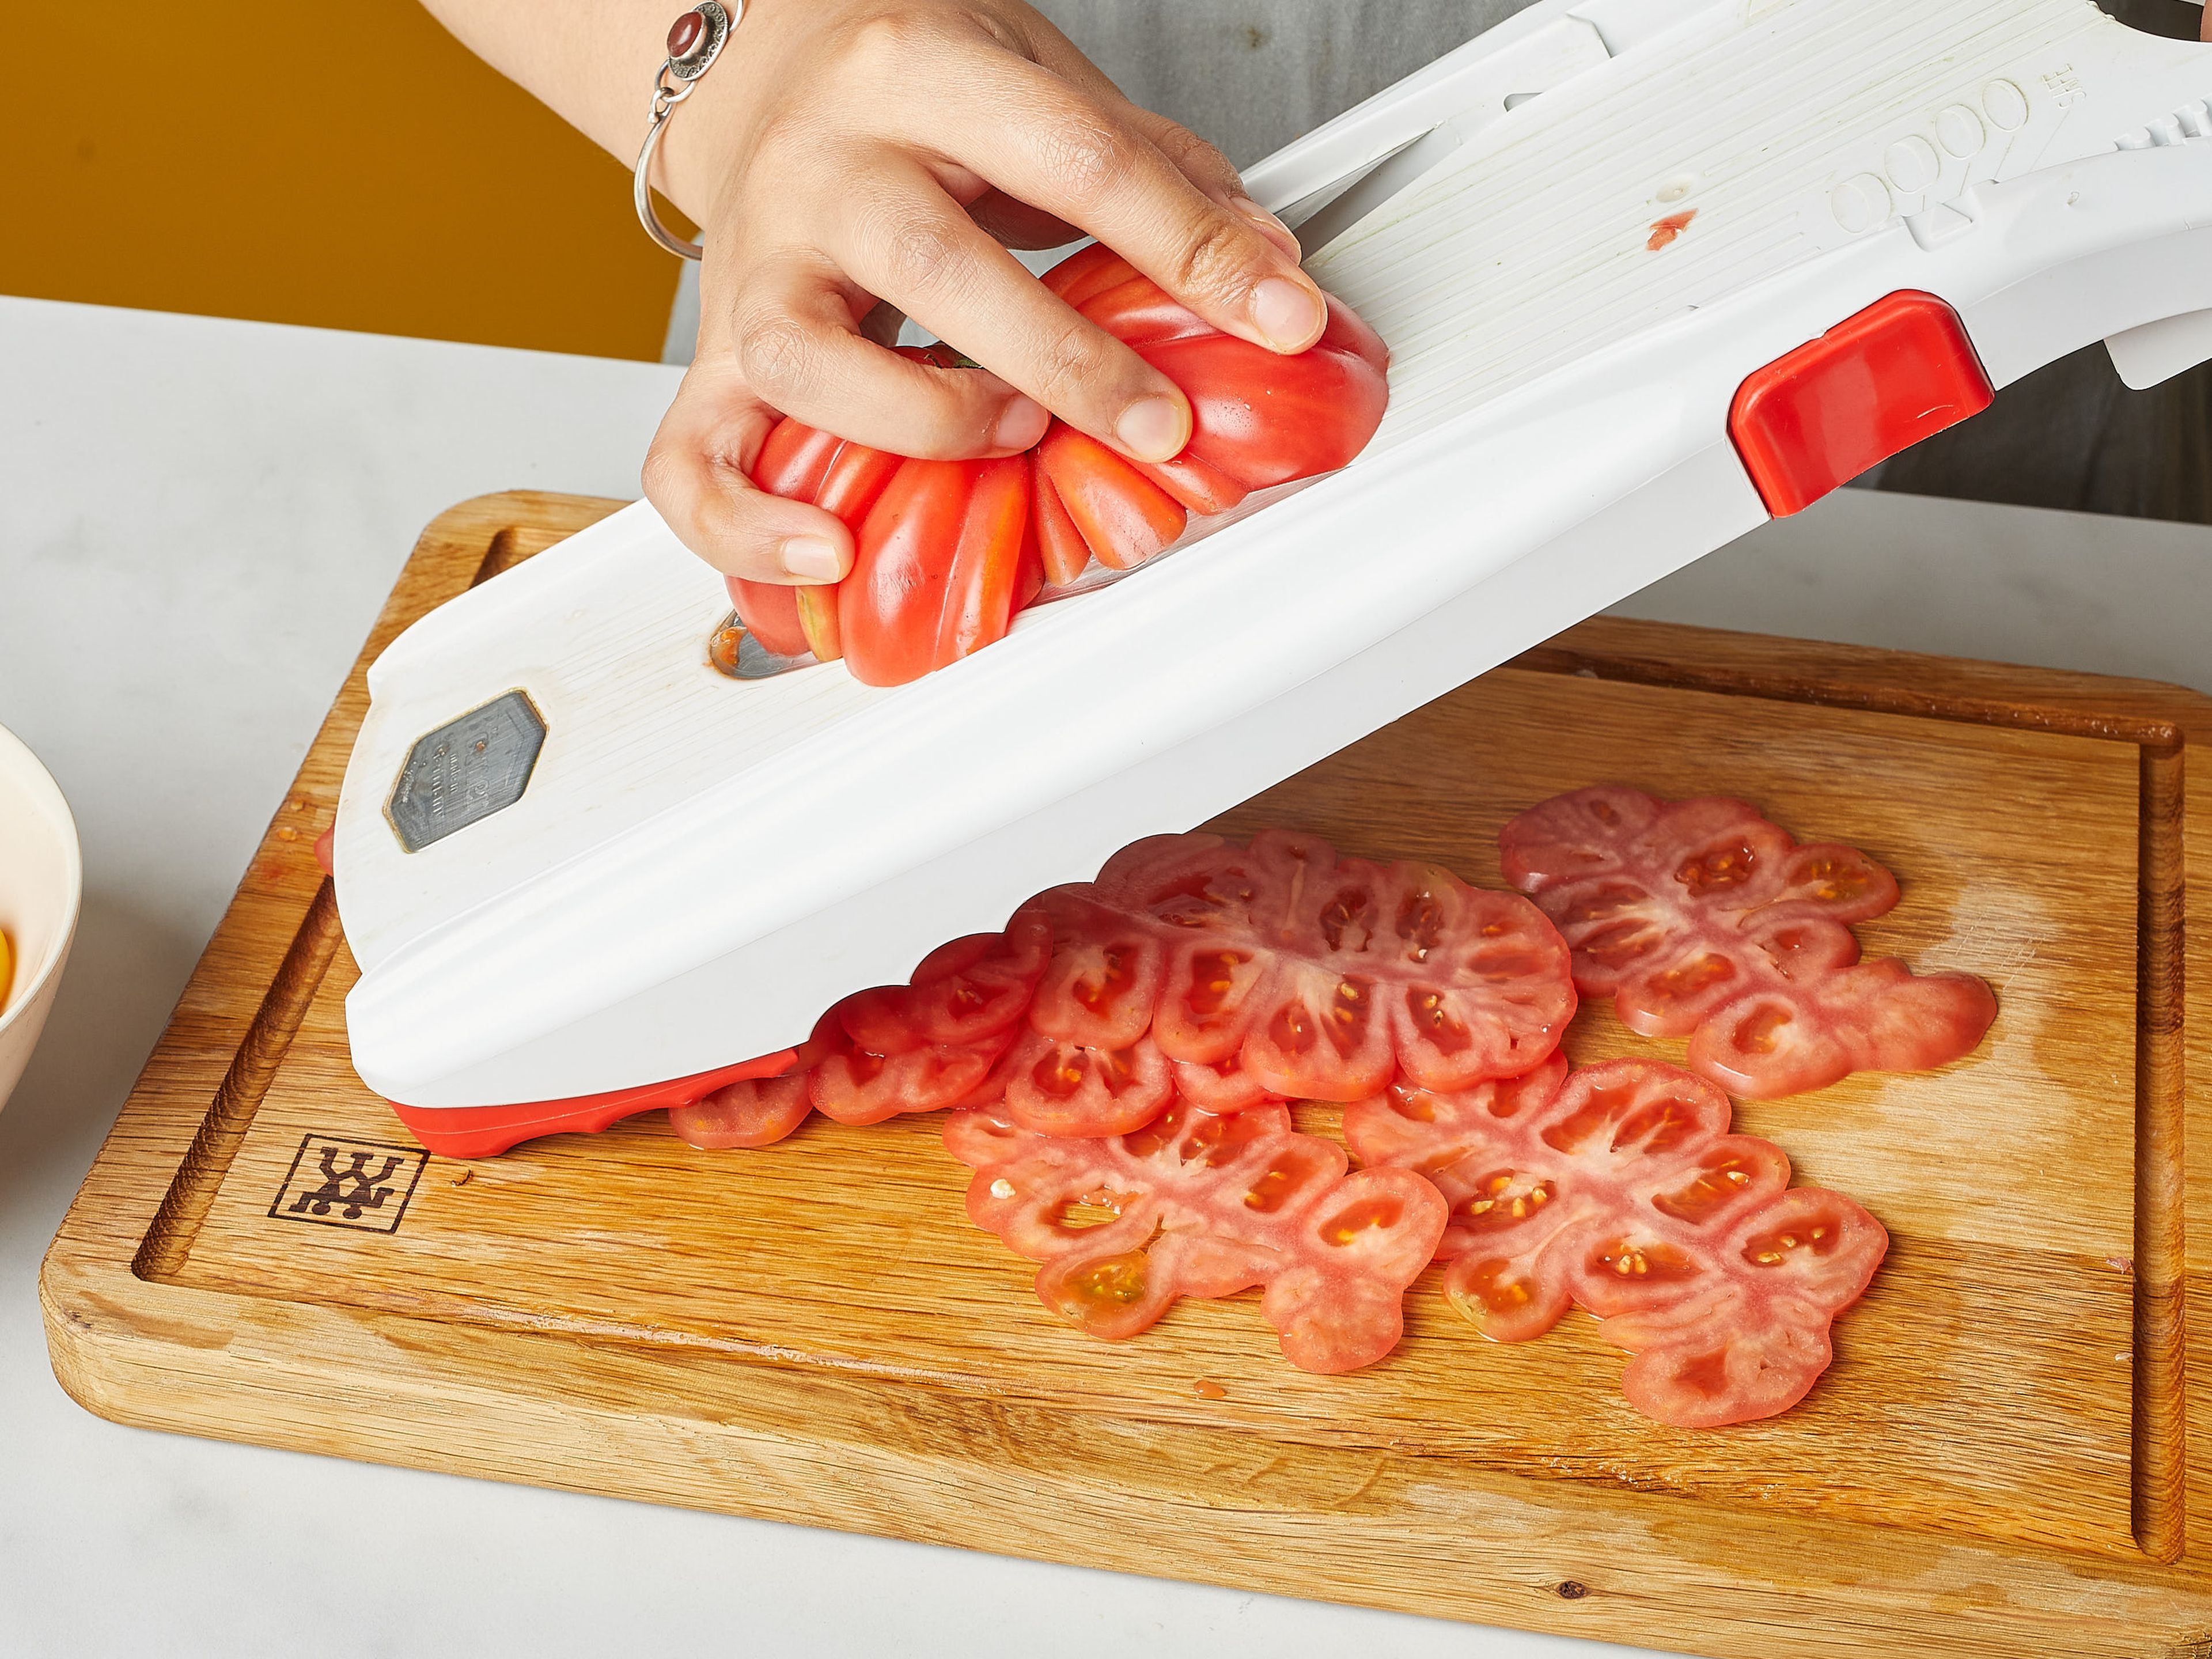 Preheat the oven to 200°C/400ºF. Finely chop or grate the garlic. Slice larger tomatoes very thinly using a vegetable slicer, if you have one. Cut cherry tomatoes in half. Place in a baking dish, salt, and let stand for about 10 min to release some of the liquid.